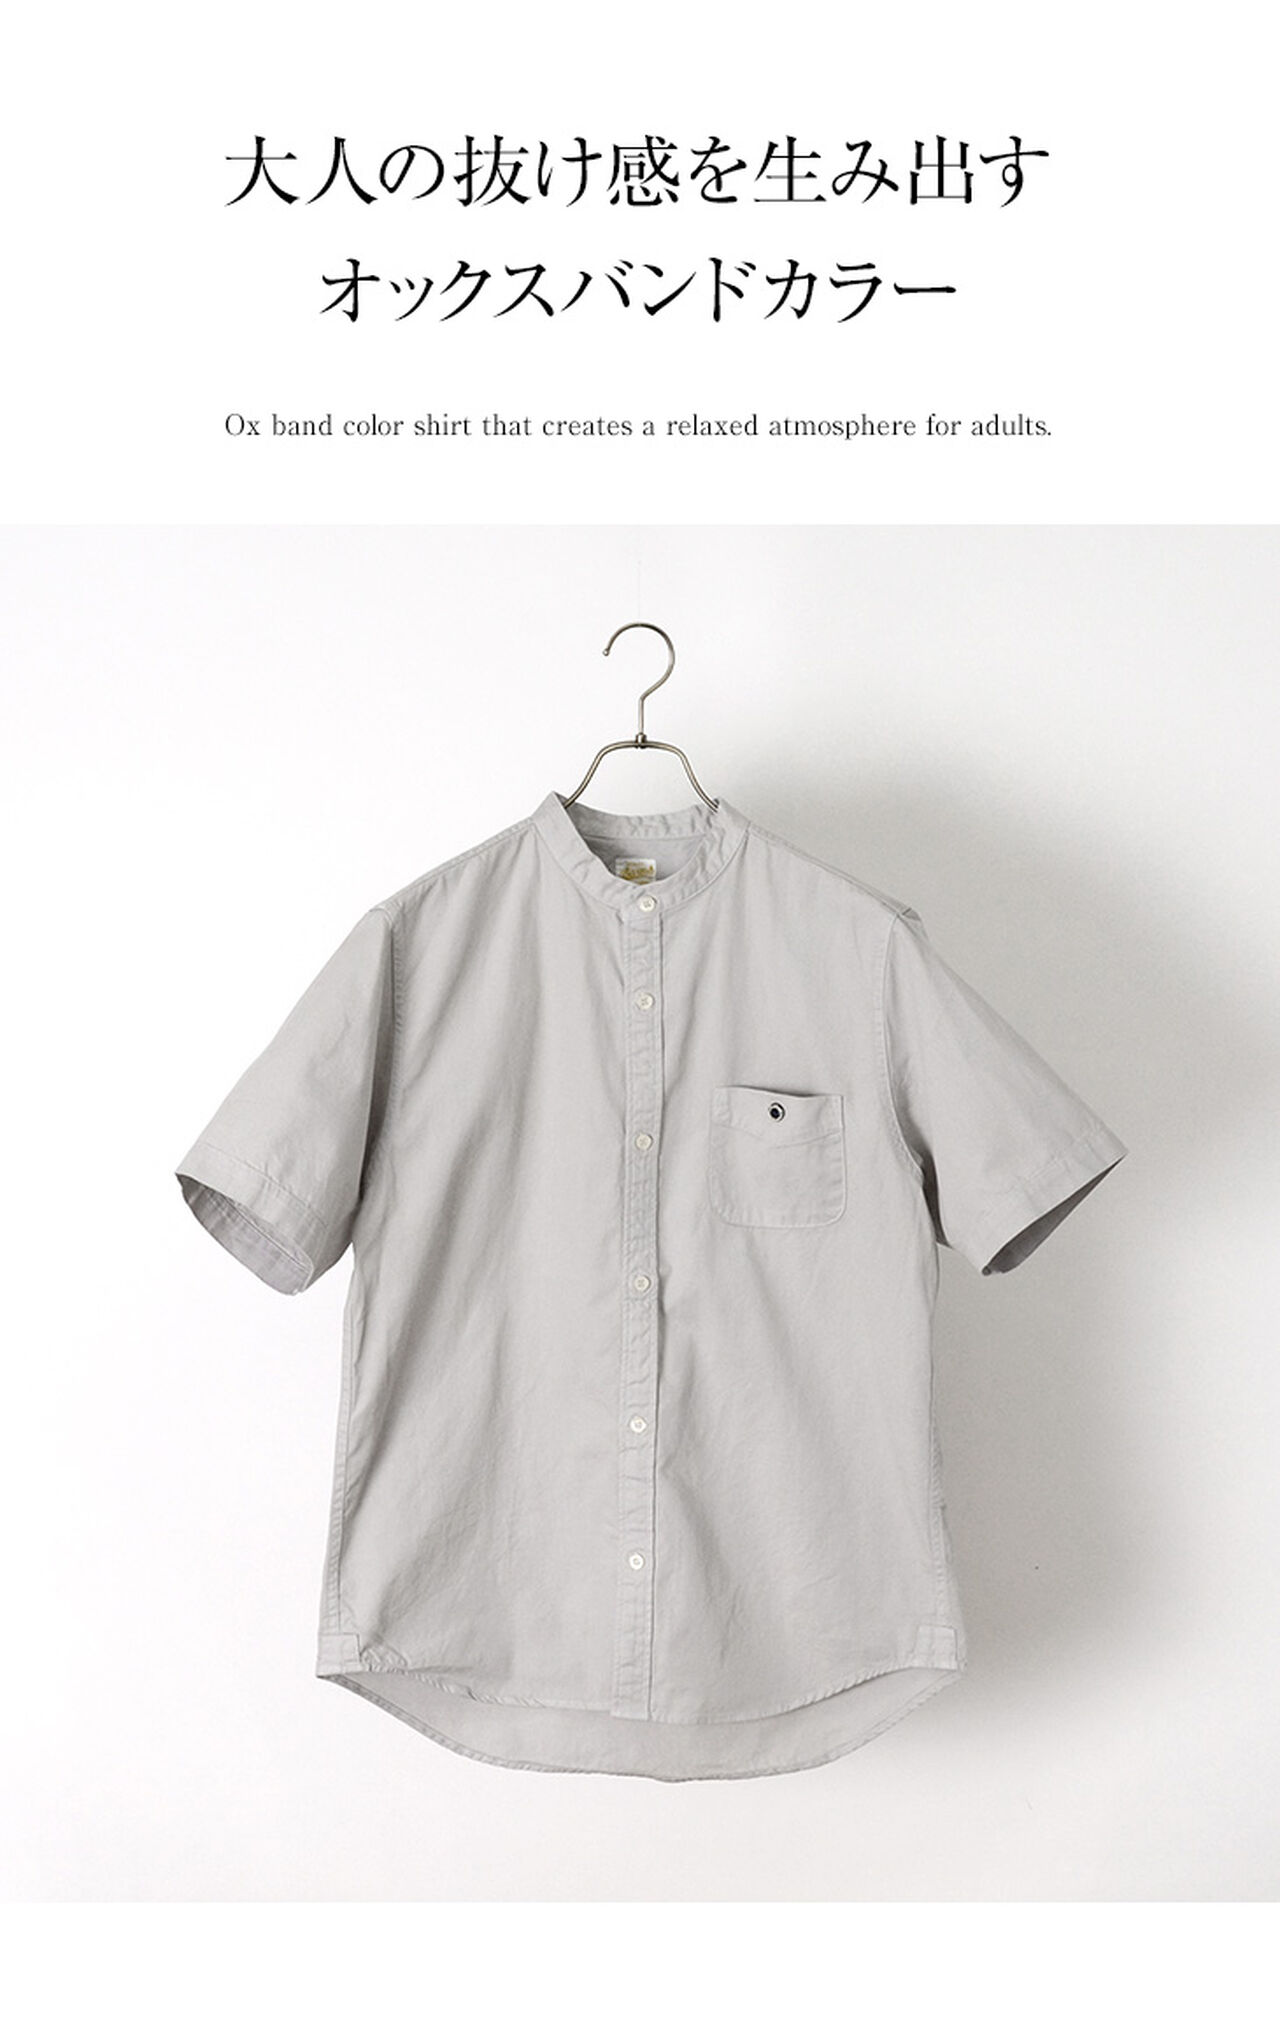 BR-7750R Ox S/S Band Collar Shirt,, large image number 3